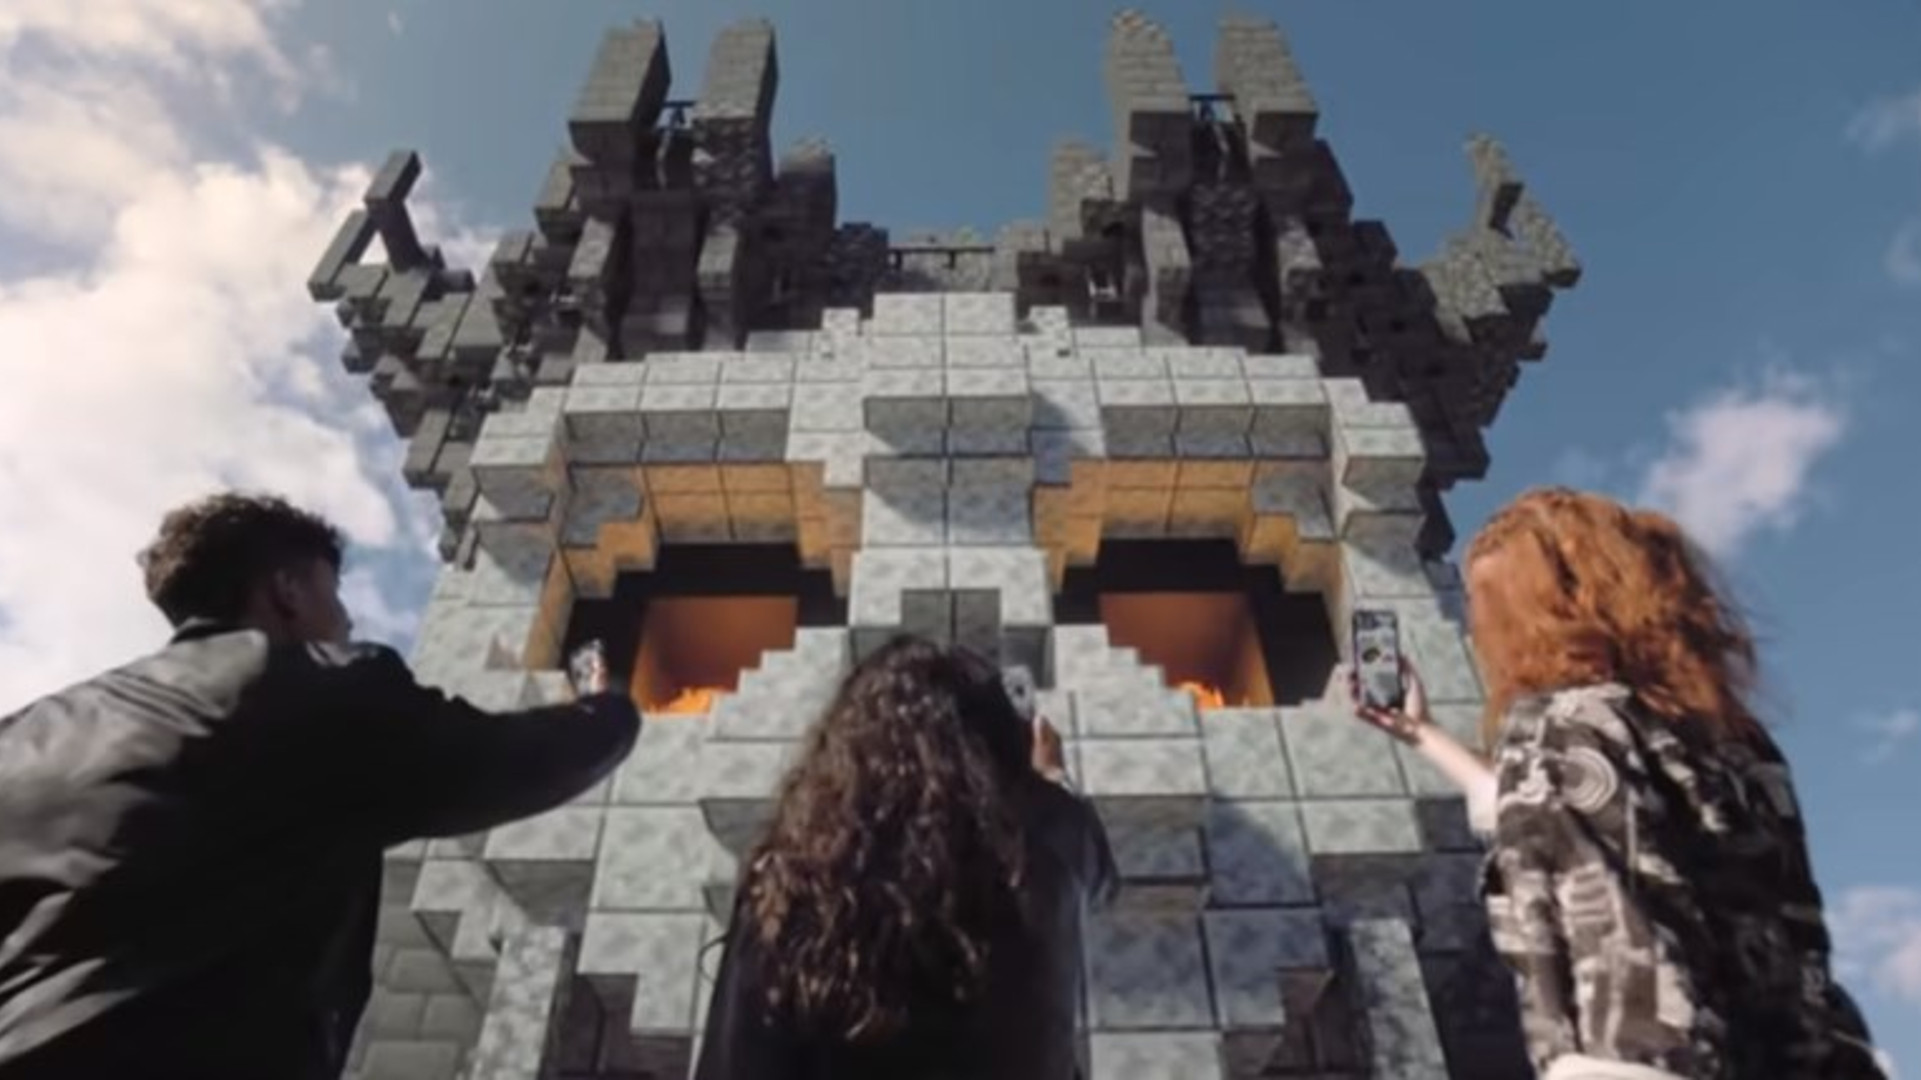 Minecraft Earth: Microsoft release early access version of AR game